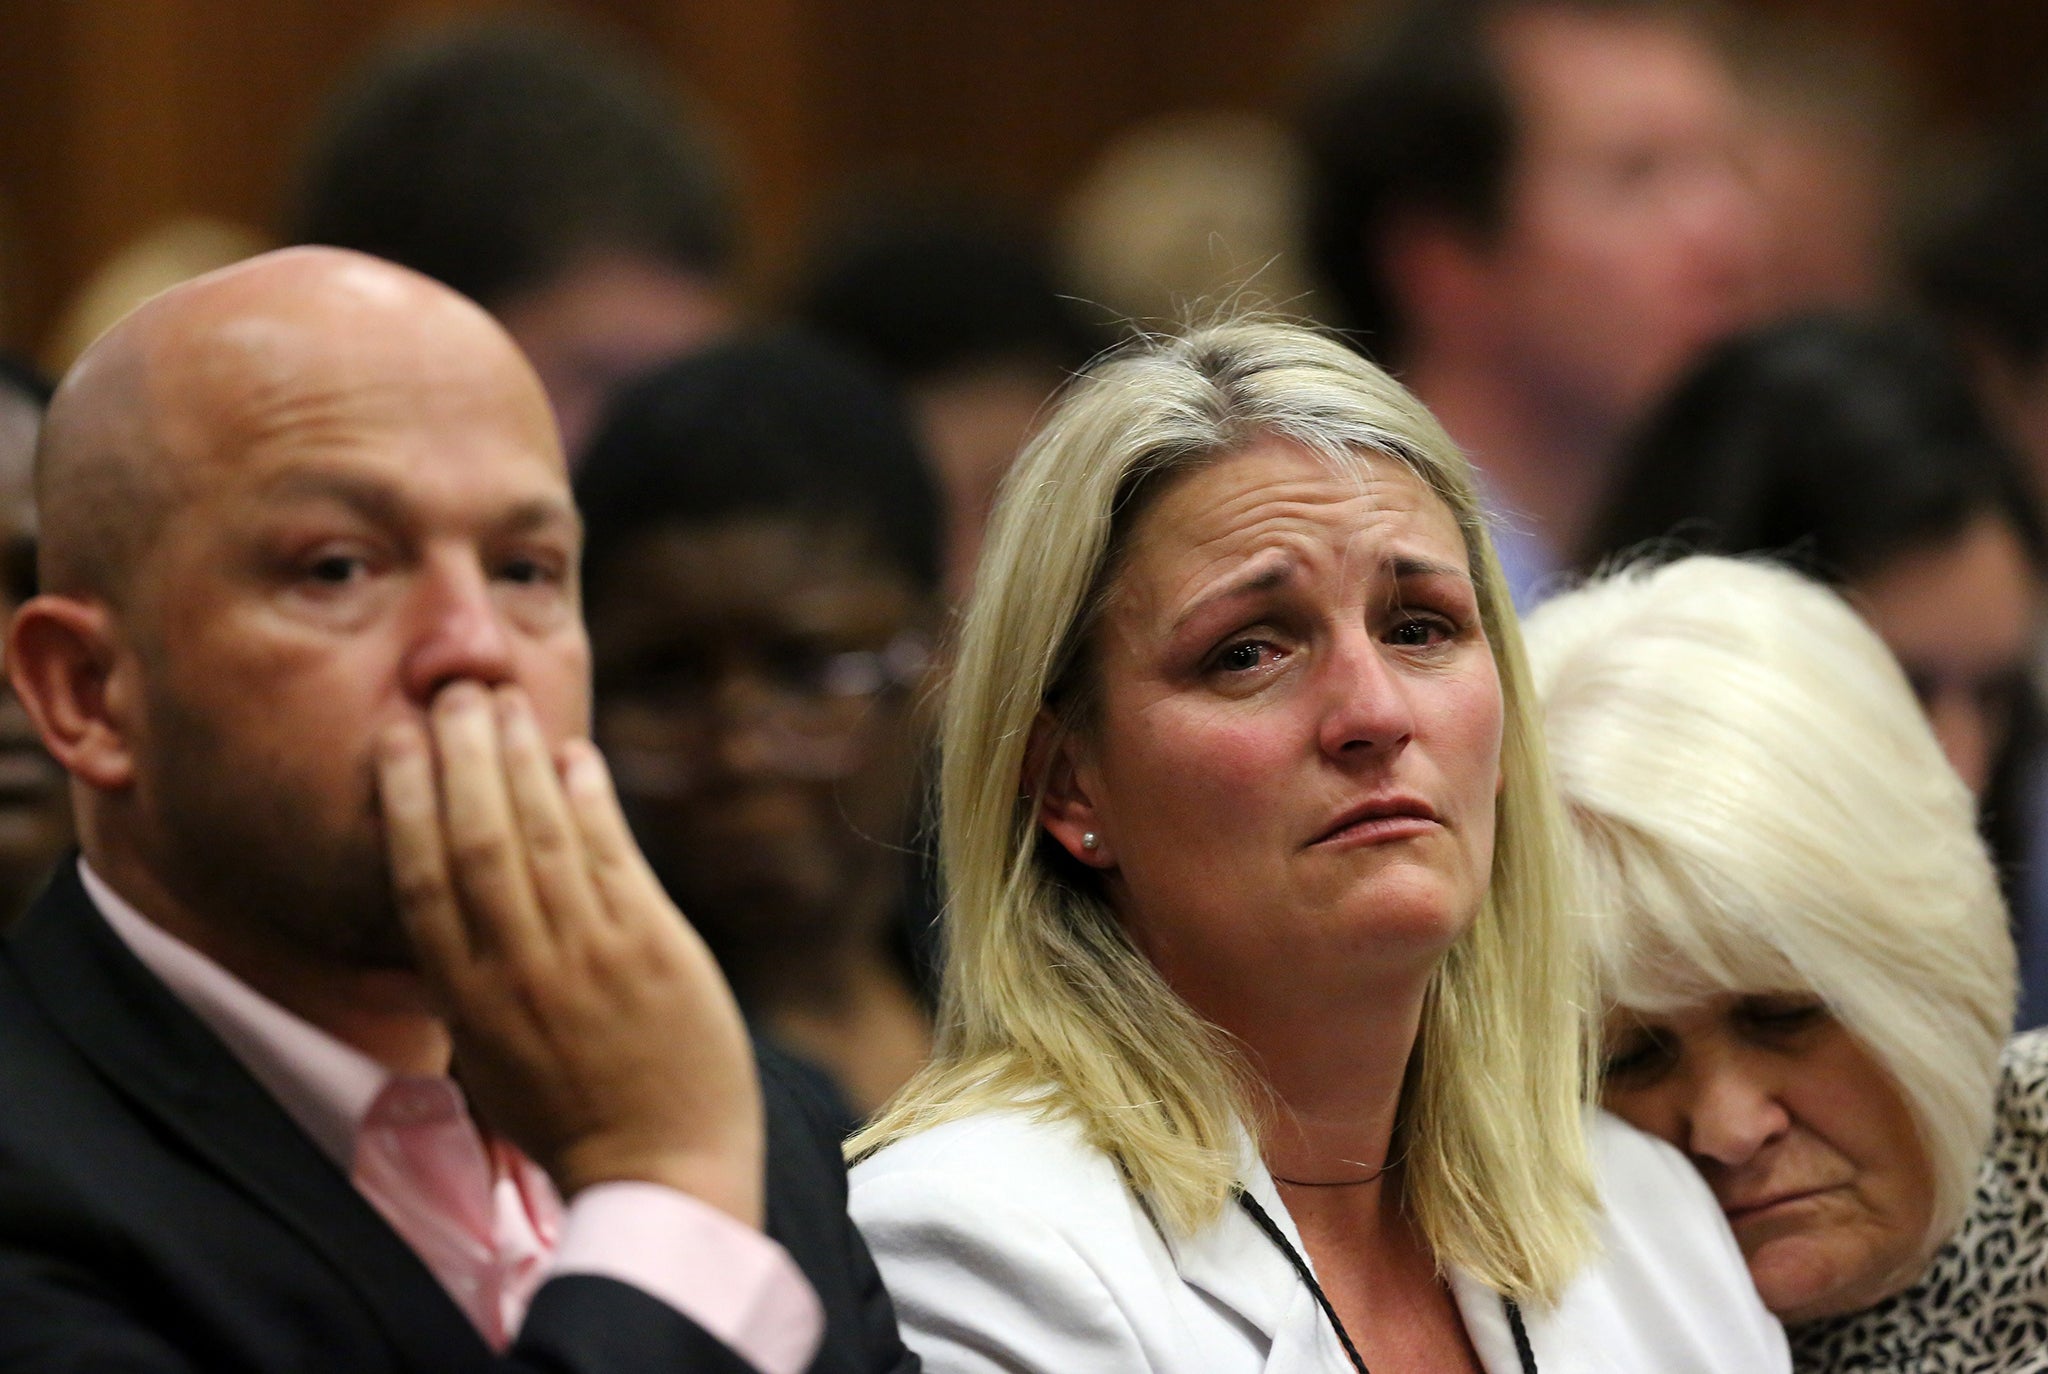 Family members of Reeva Steenkamp react as they listen to the verdict (Getty Images)